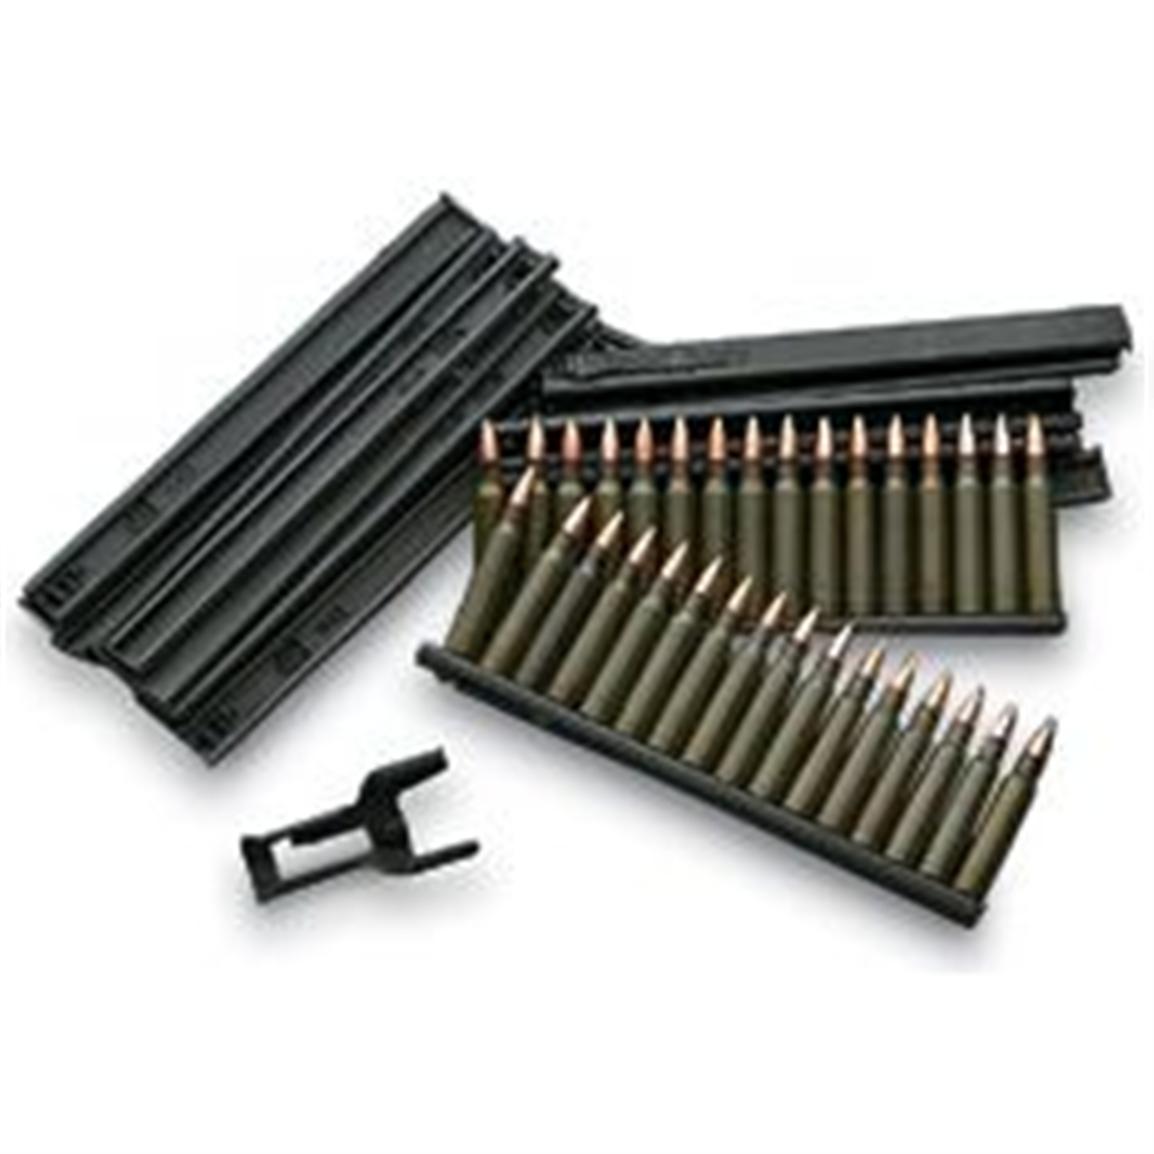 New 20 Pack Ak 74 Stripper Clips With Guide 56591 At Sportsmans Guide